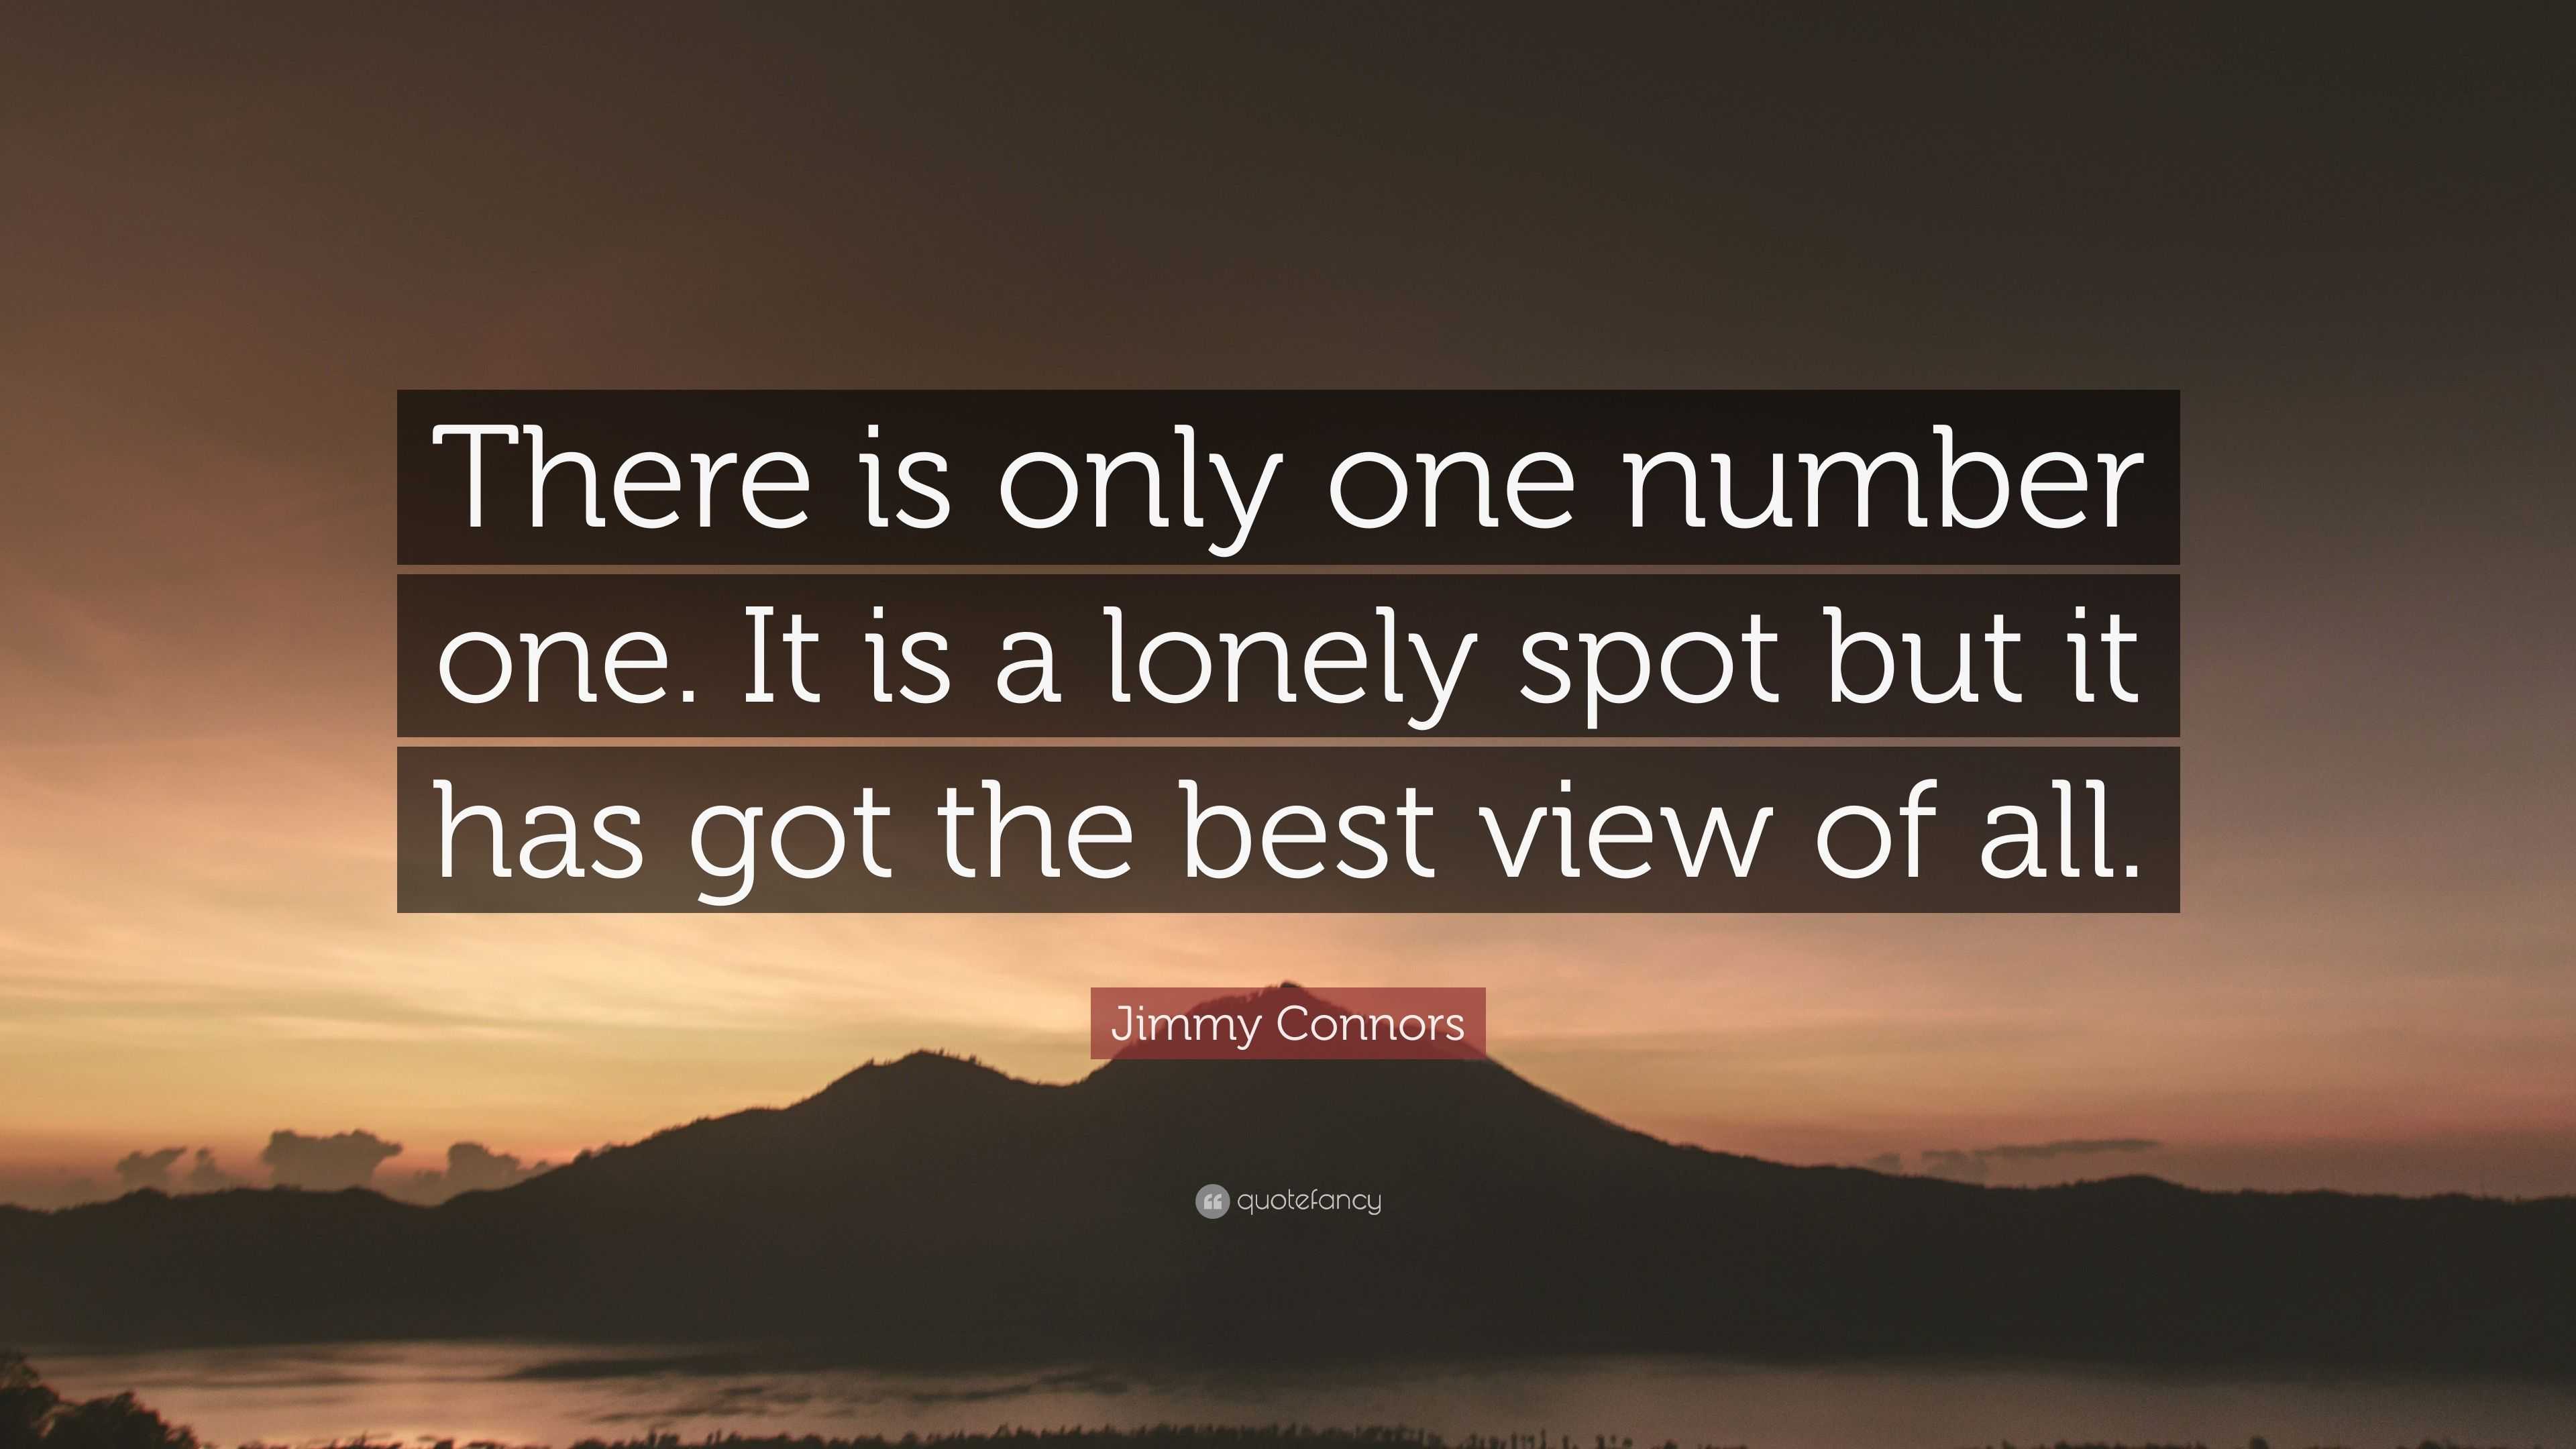 Alone or Lonely?. At first glance it seems like both the…